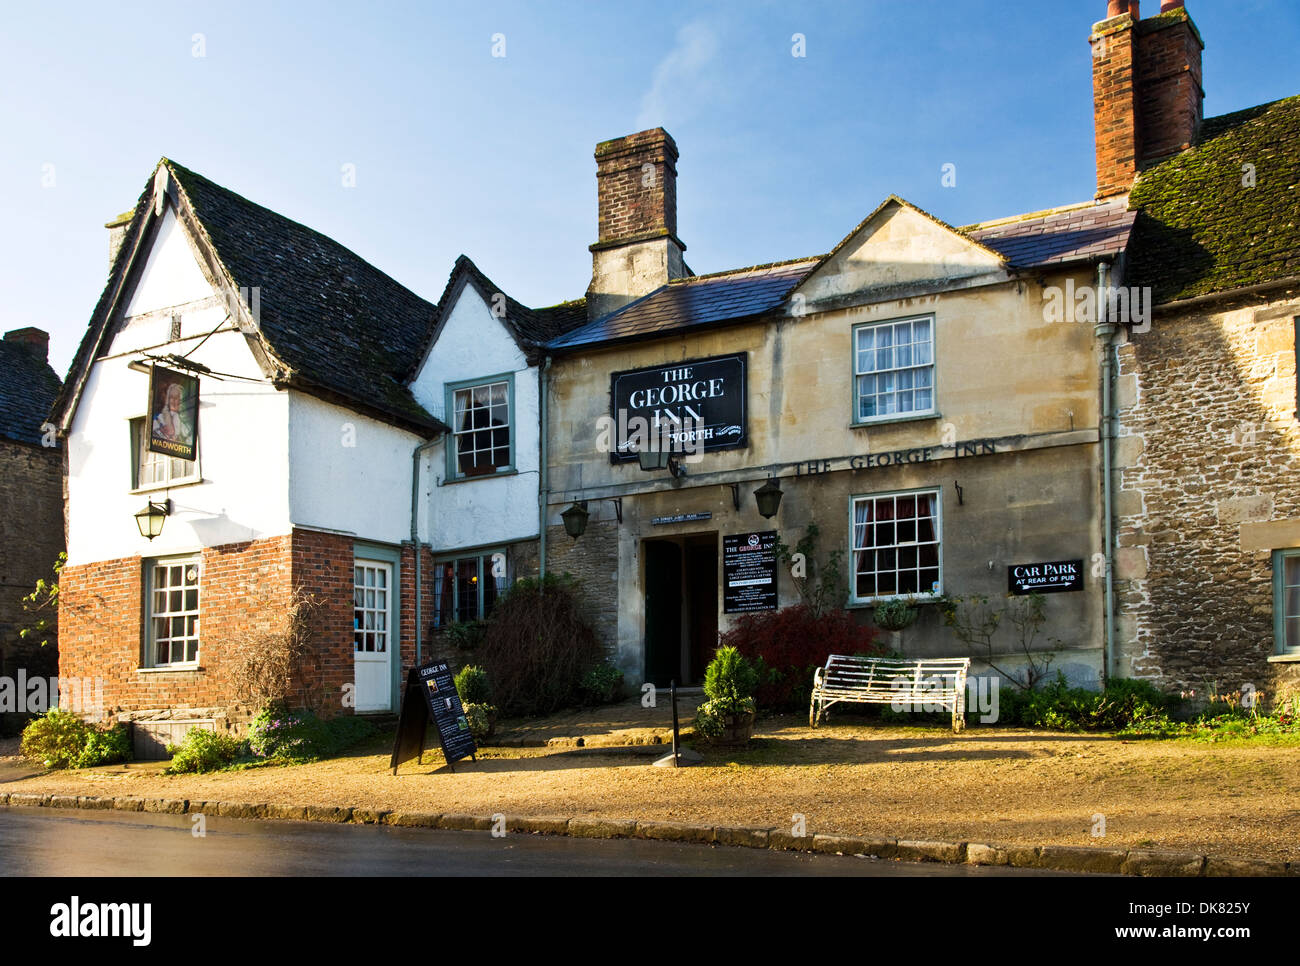 The George Inn, a famous pub in the picturesque village of Lacock, Wiltshire Stock Photo